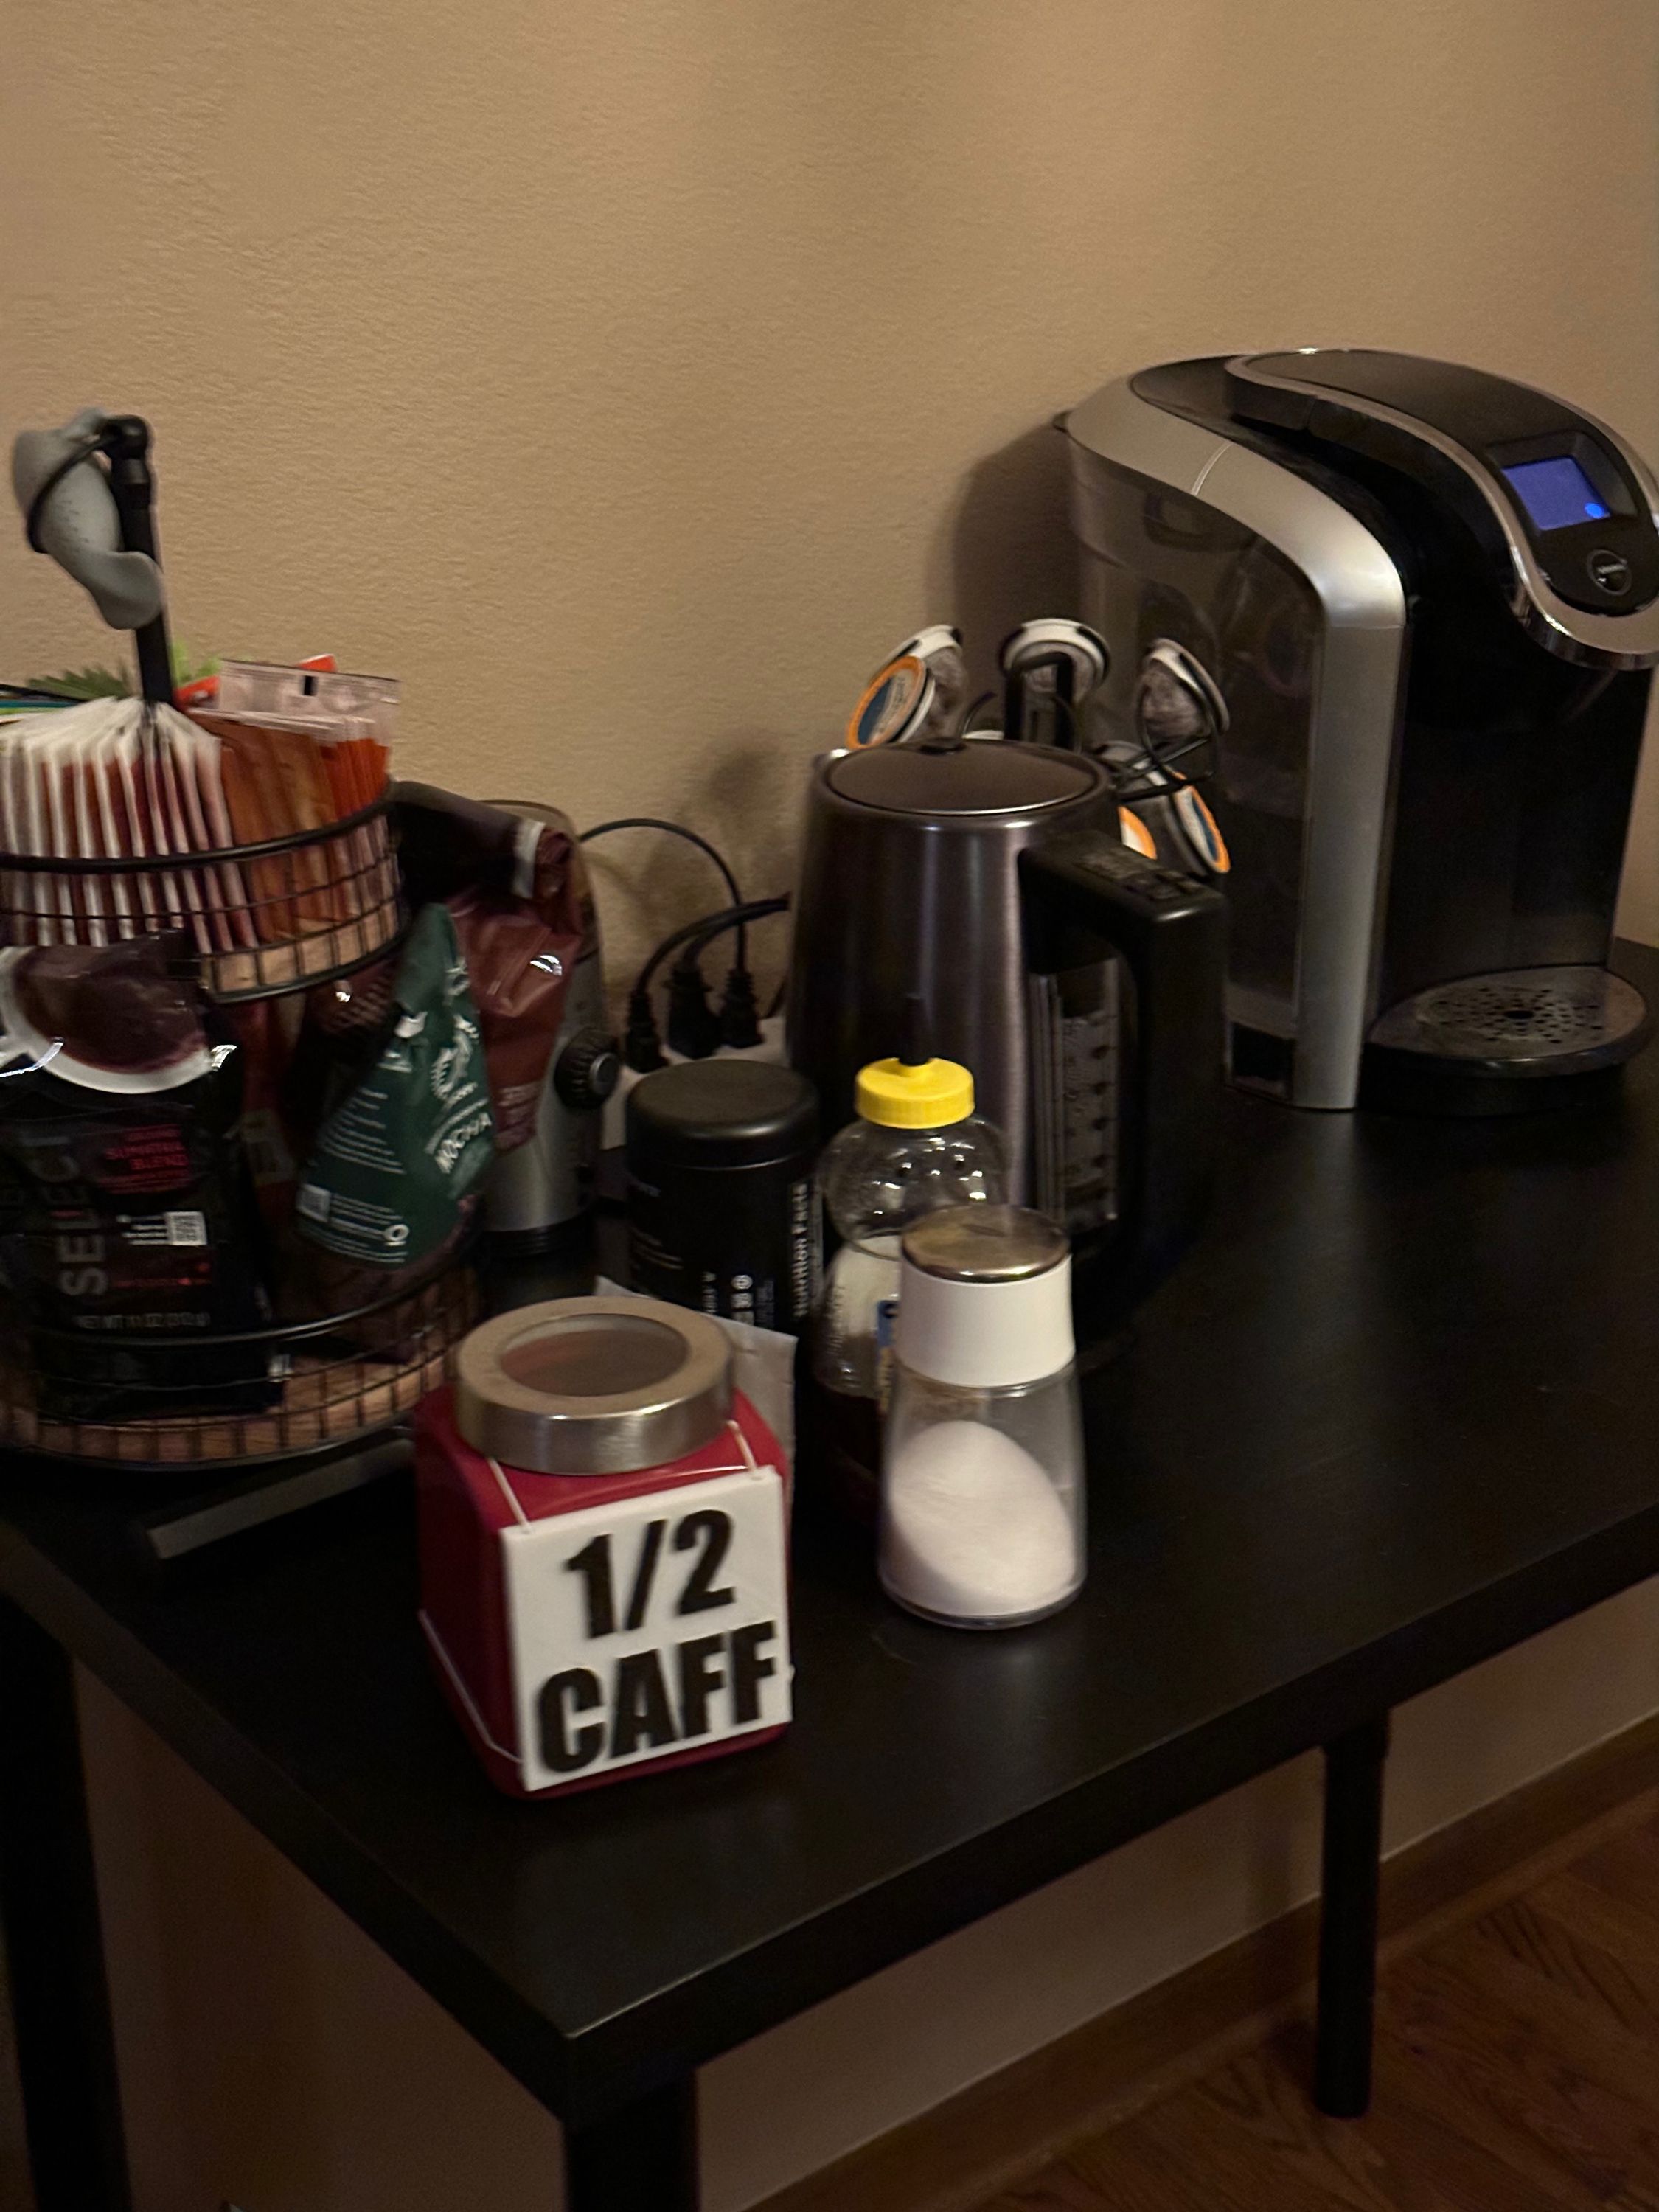 The final product. My coffee nook with a labeled 1/2 caff canister